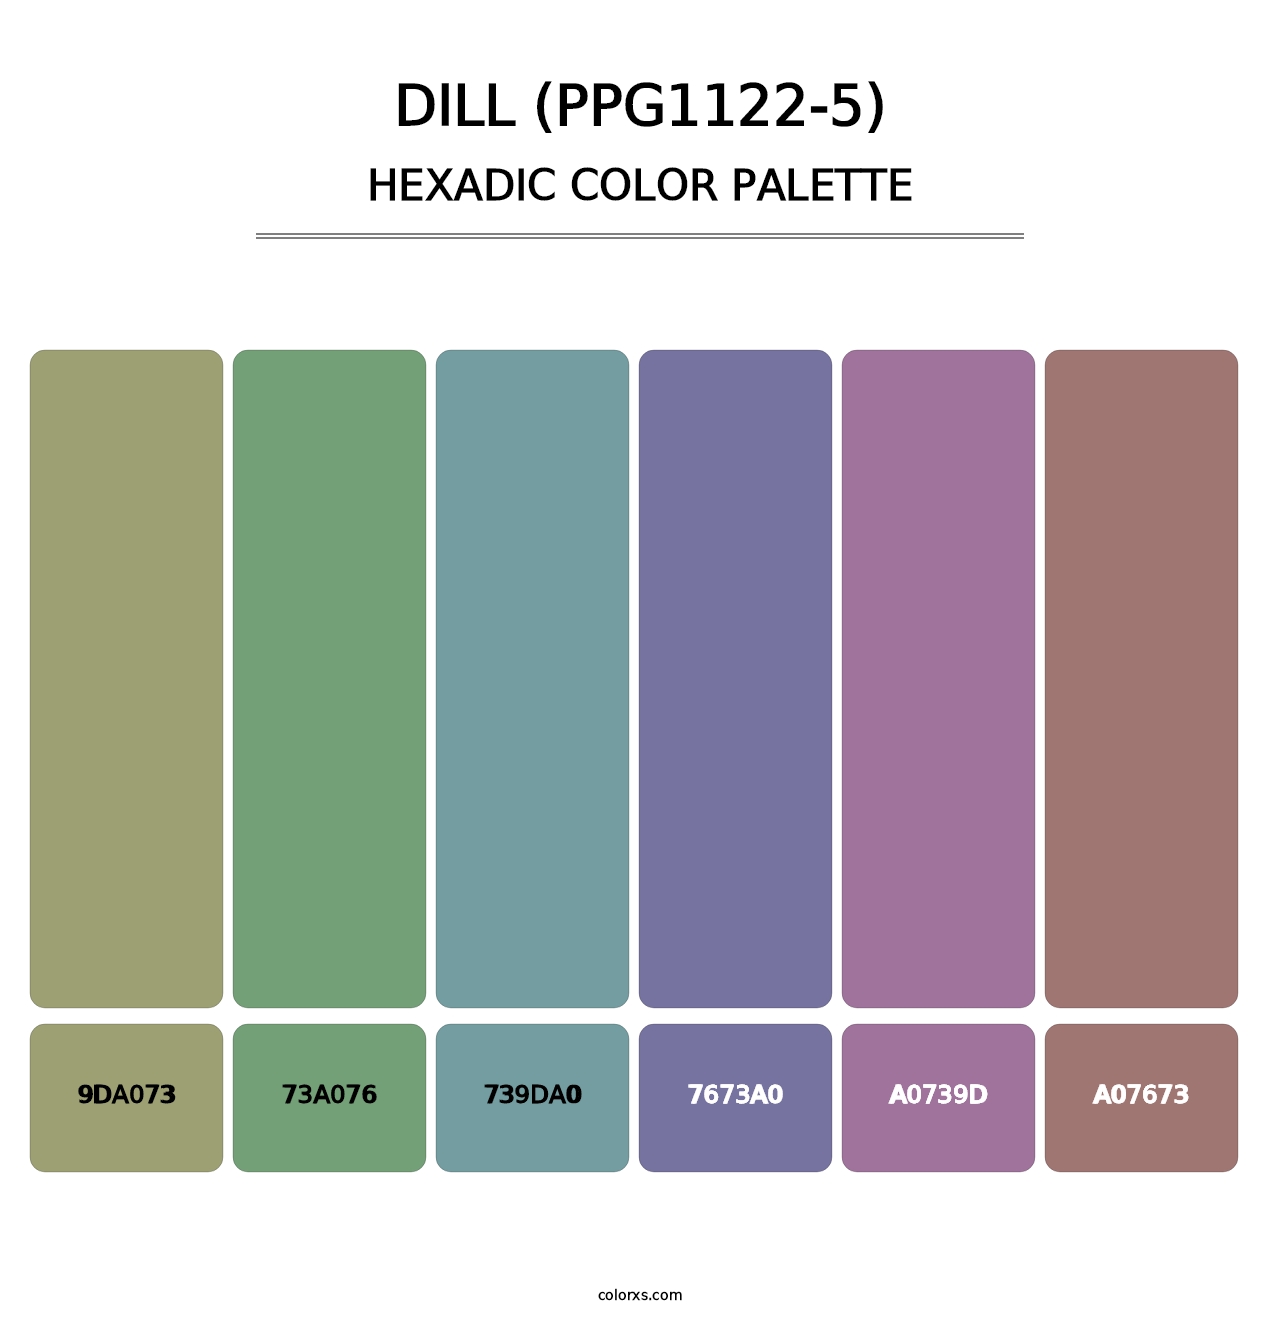 Dill (PPG1122-5) - Hexadic Color Palette